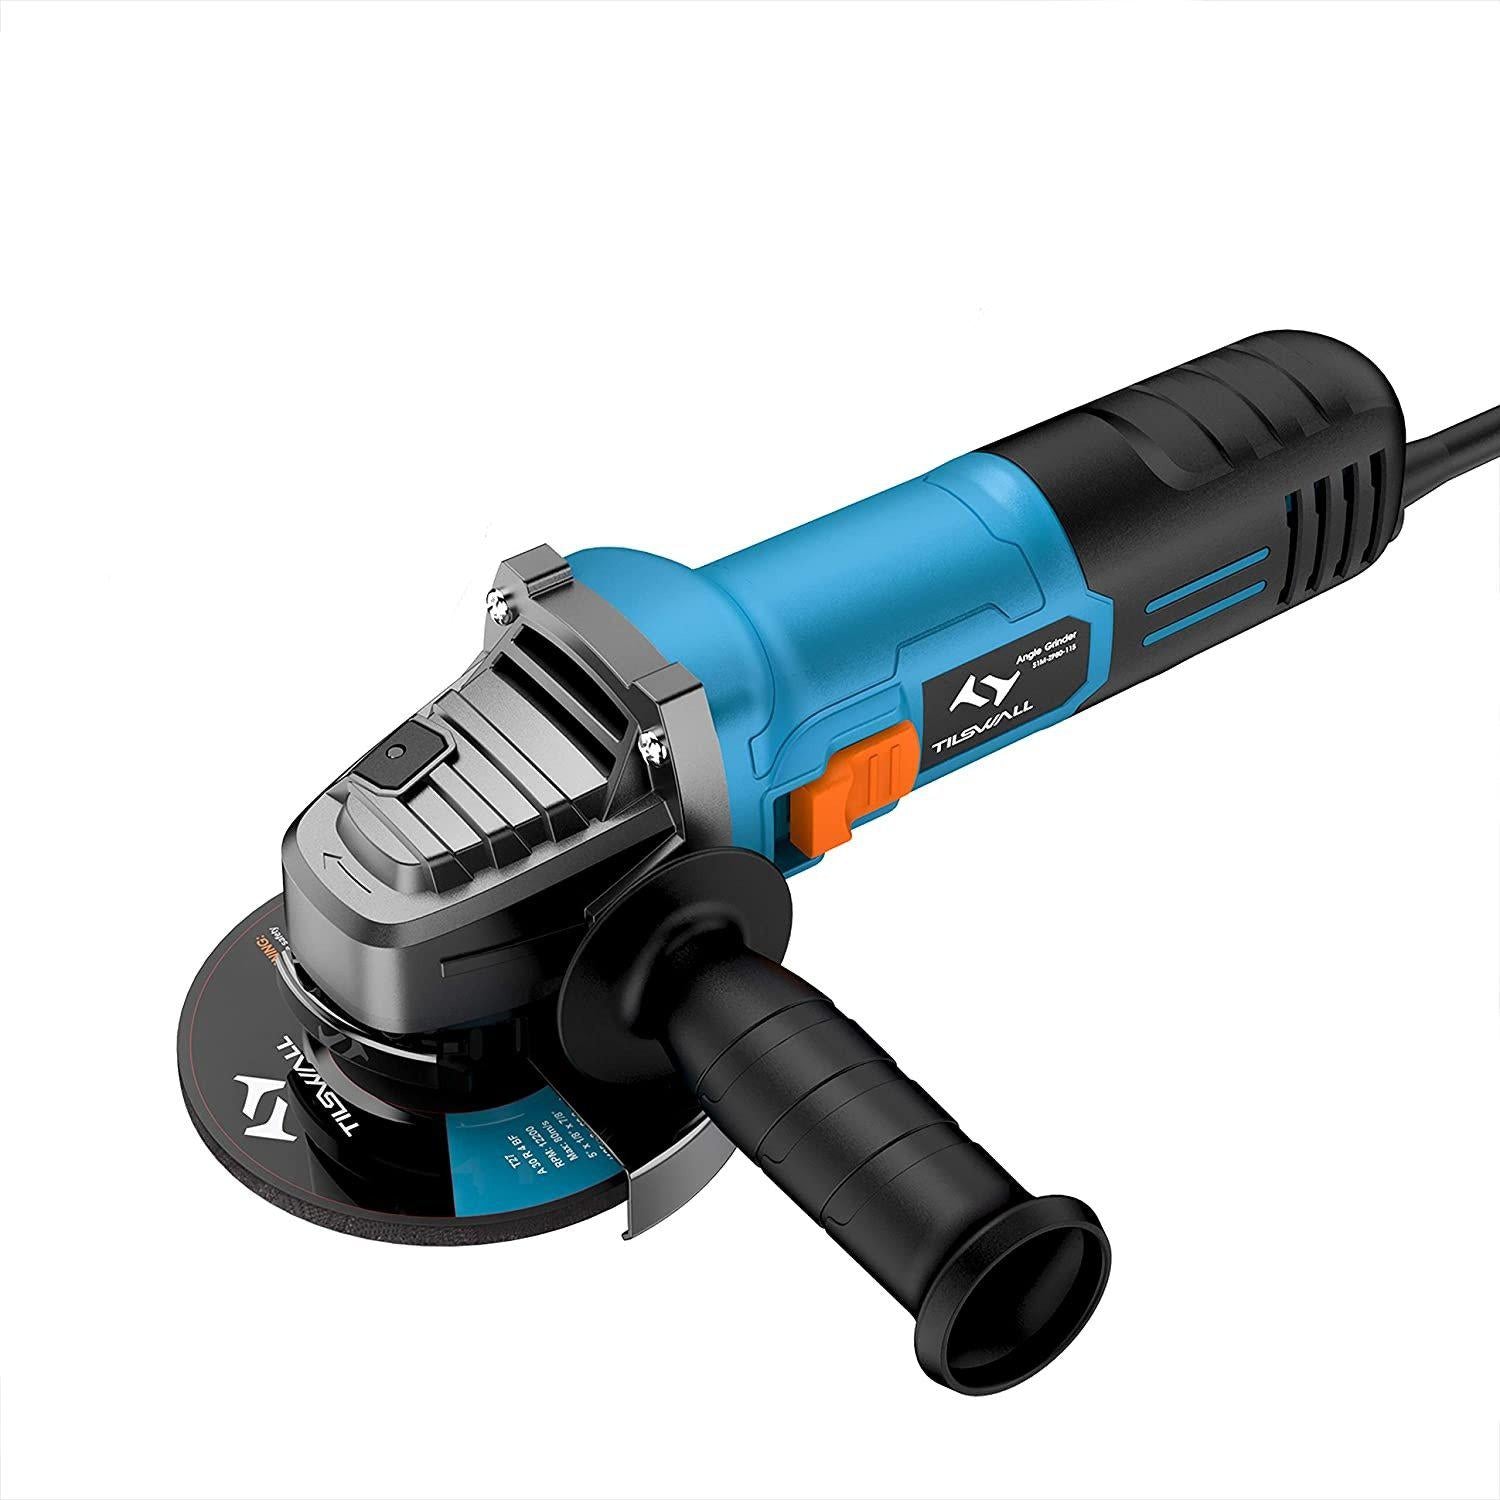 Tilswall S1M-ZP80-125 Angle Grinder 860W 12000RPM Tool